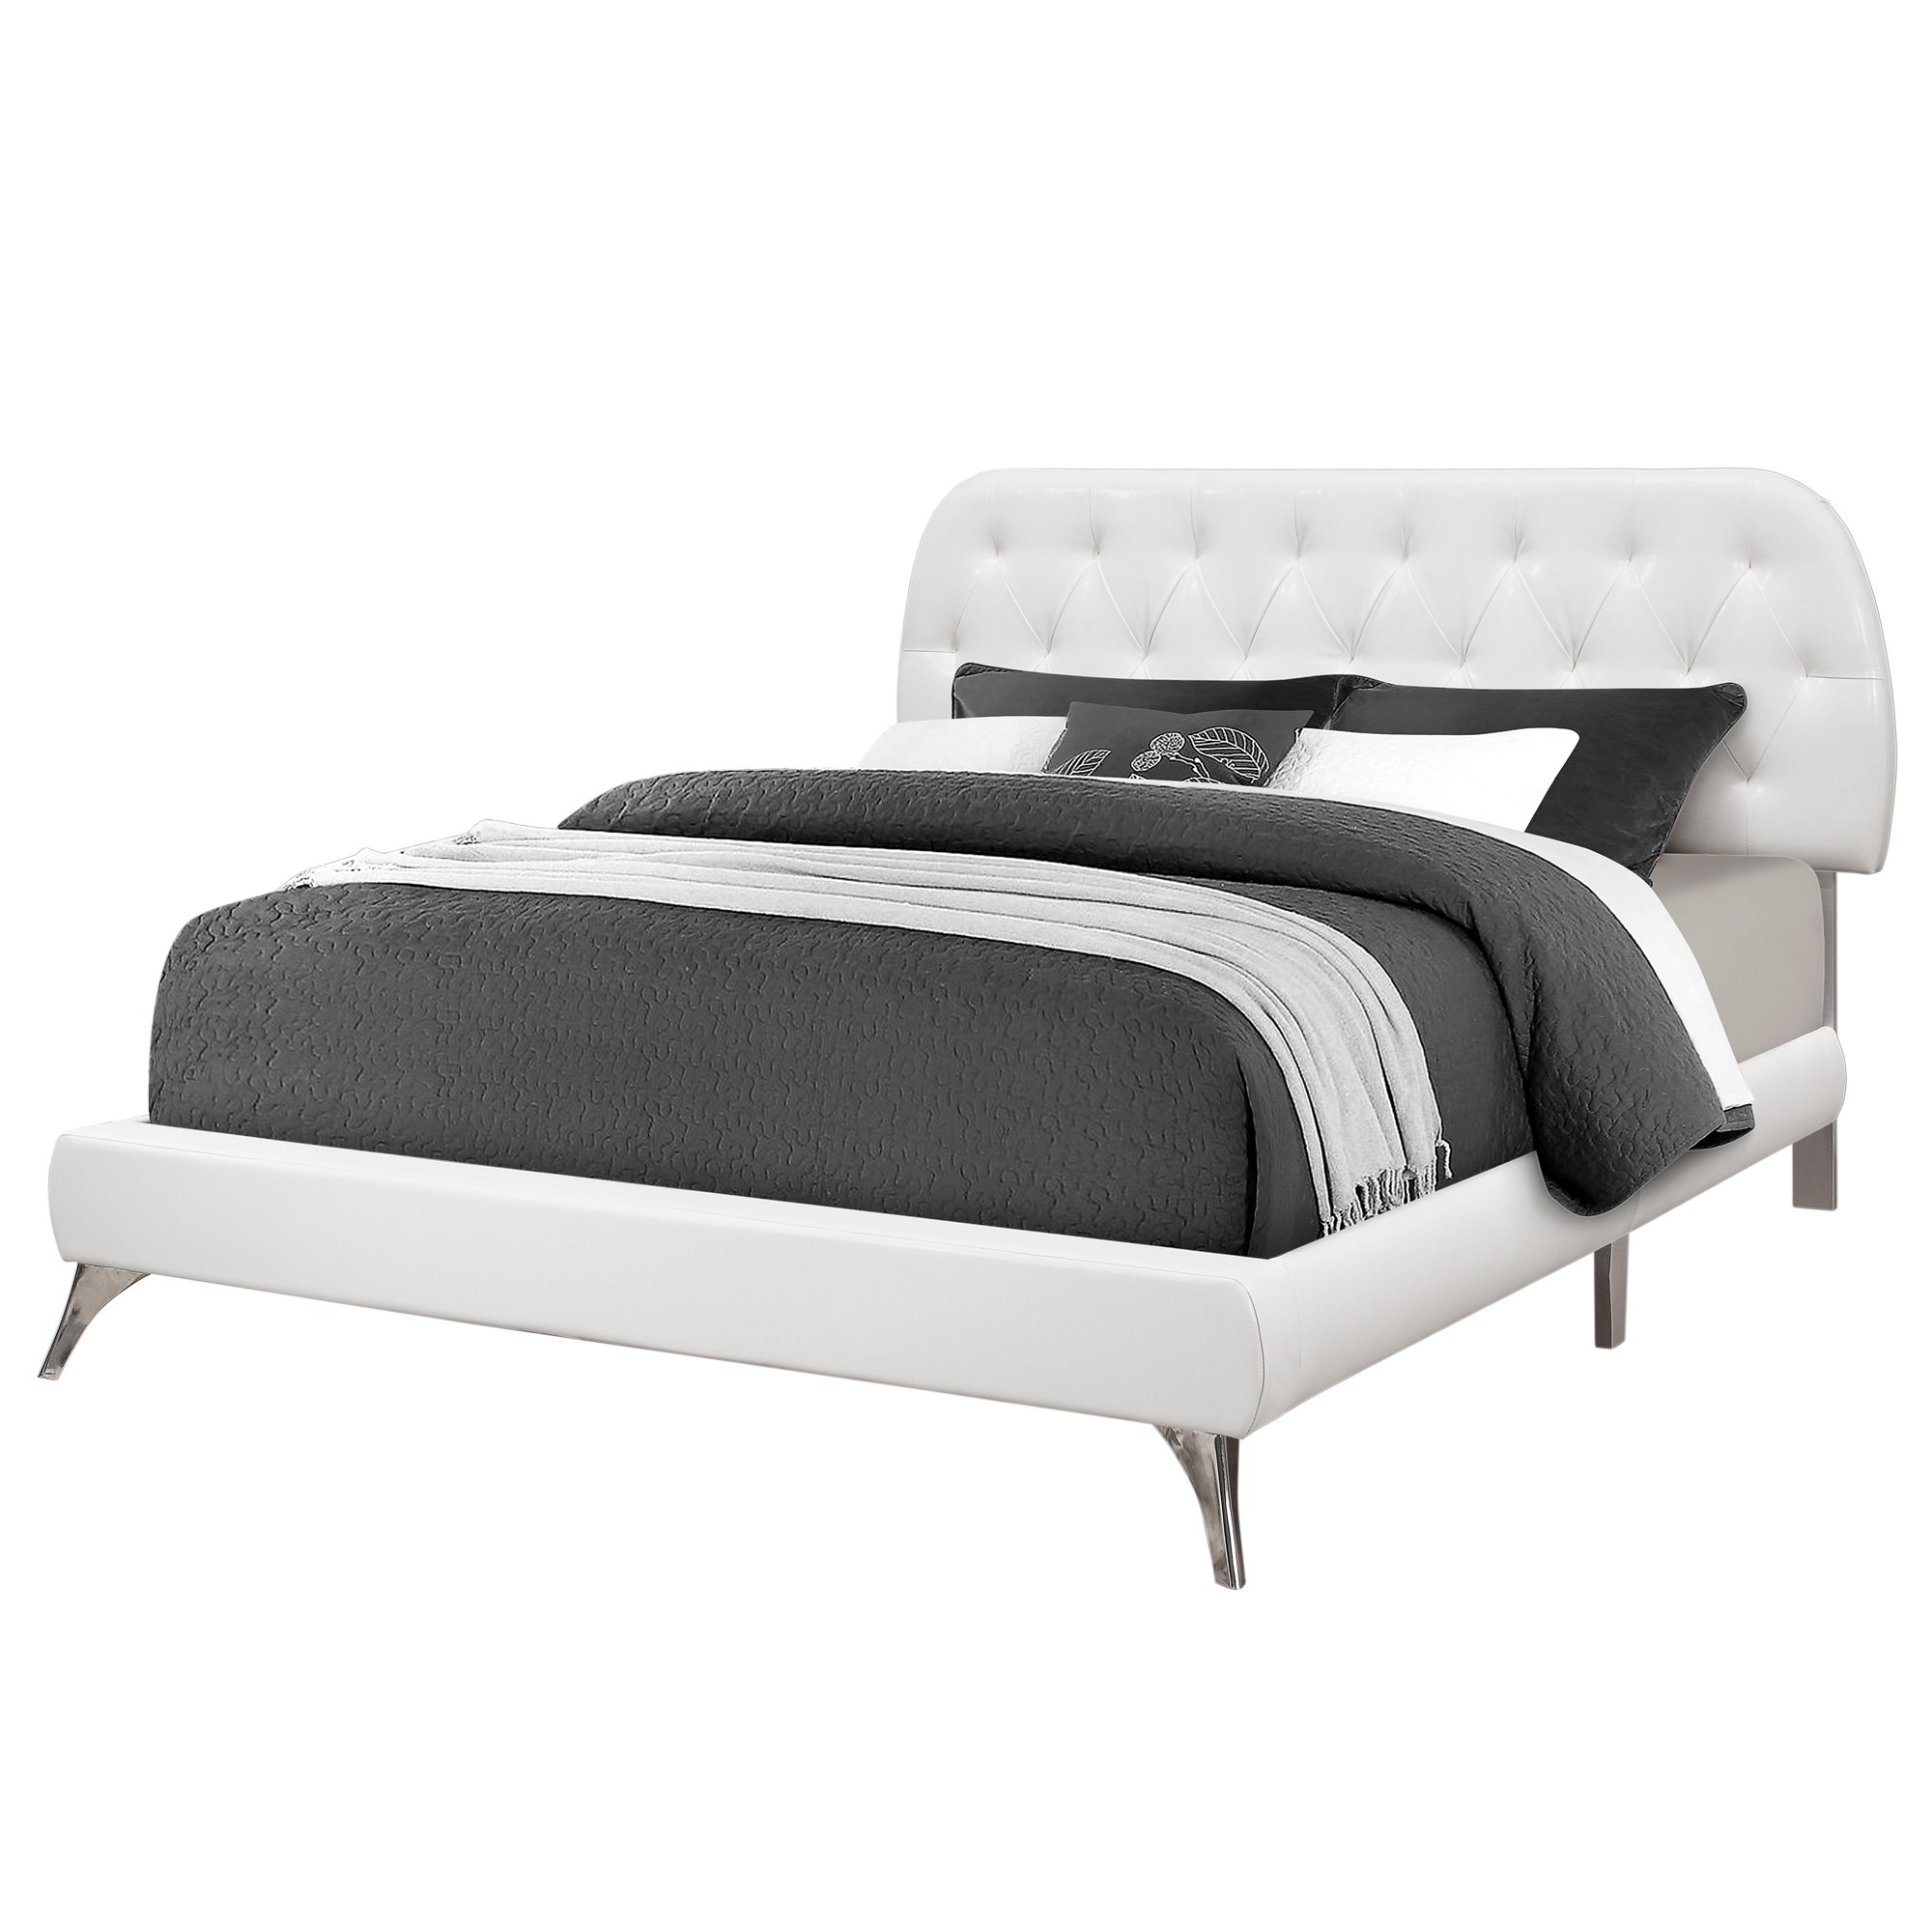 70.5" x 87.25" x 45.25" White Foam Solid Wood Leather Look Queen Sized Bed With Chrome Legs